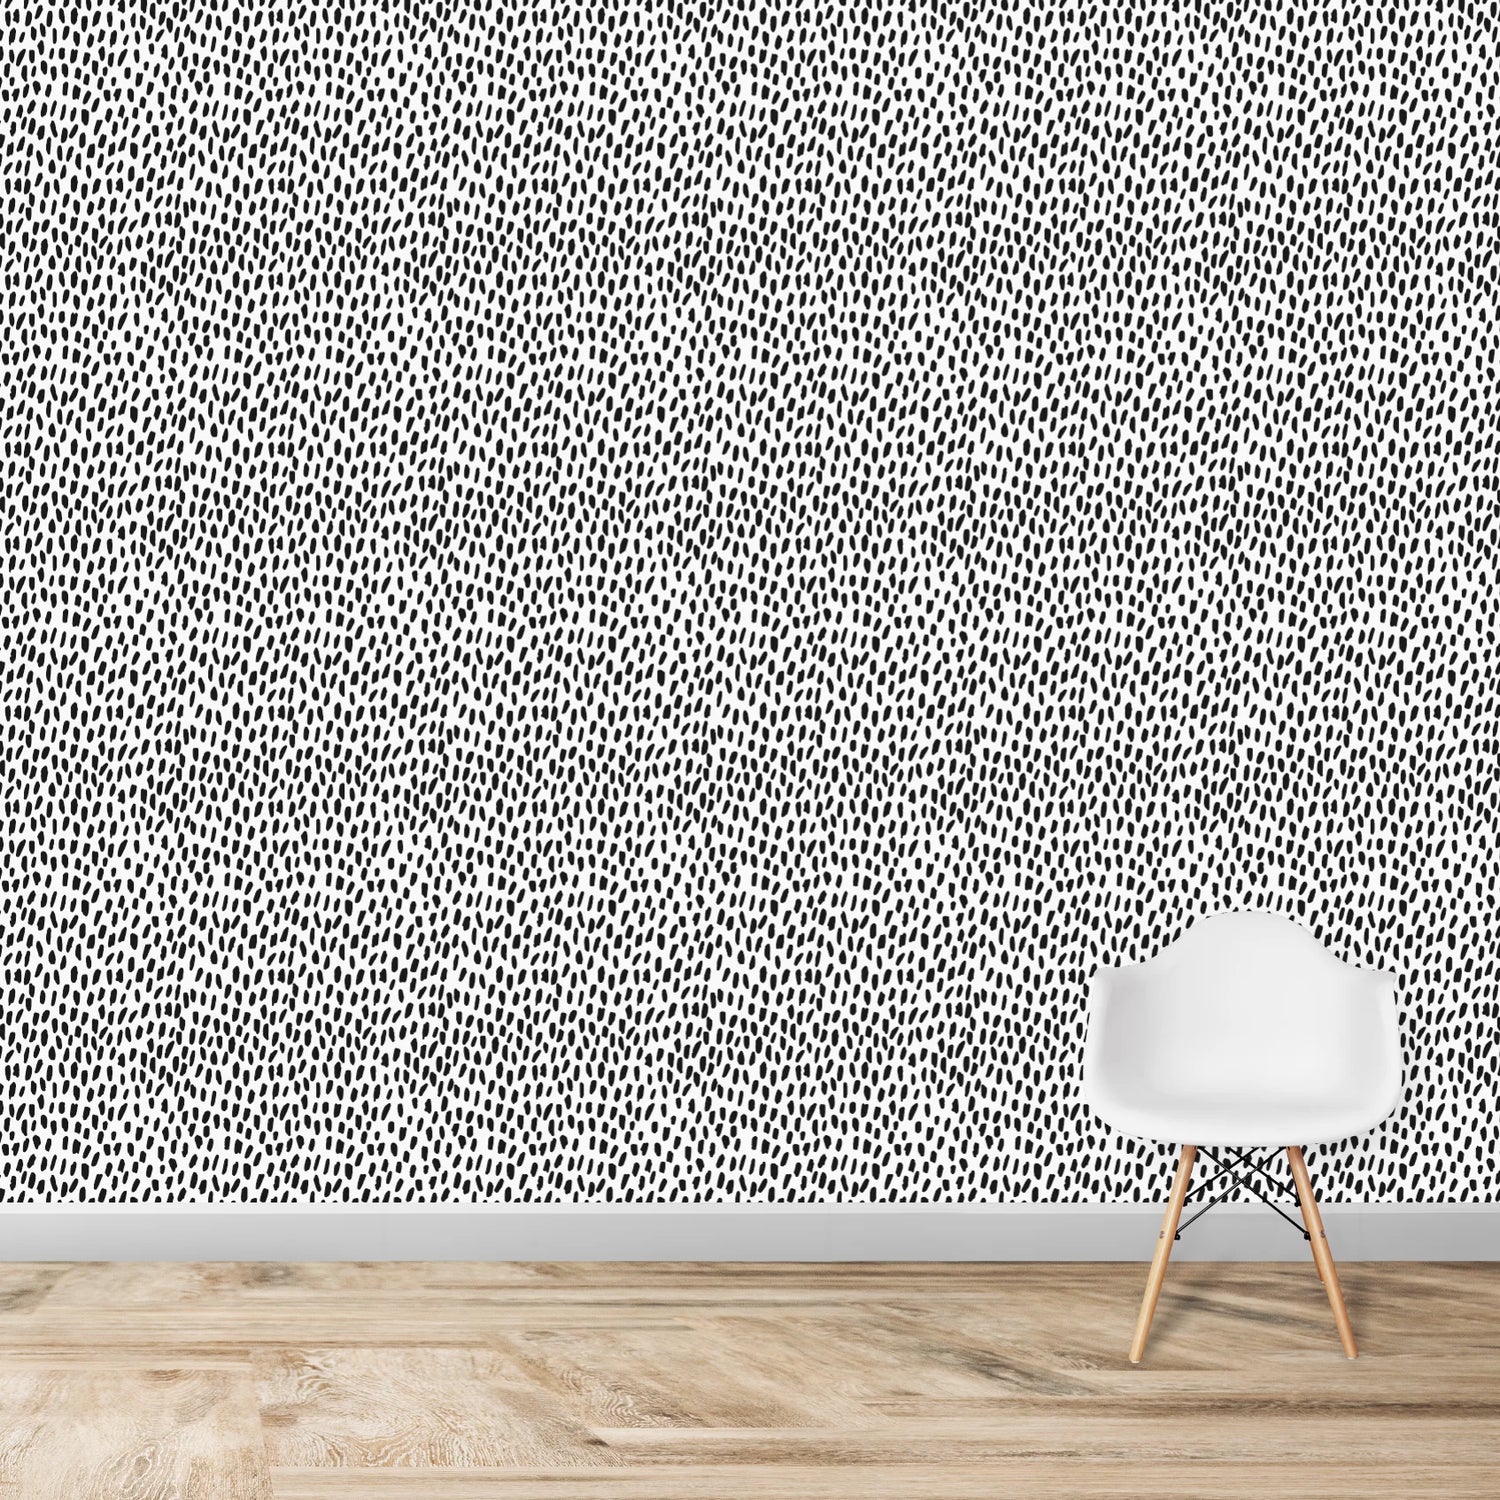 Children's Bedroom Wallpaper with Repeating Pattern - Abstract Mini Dots